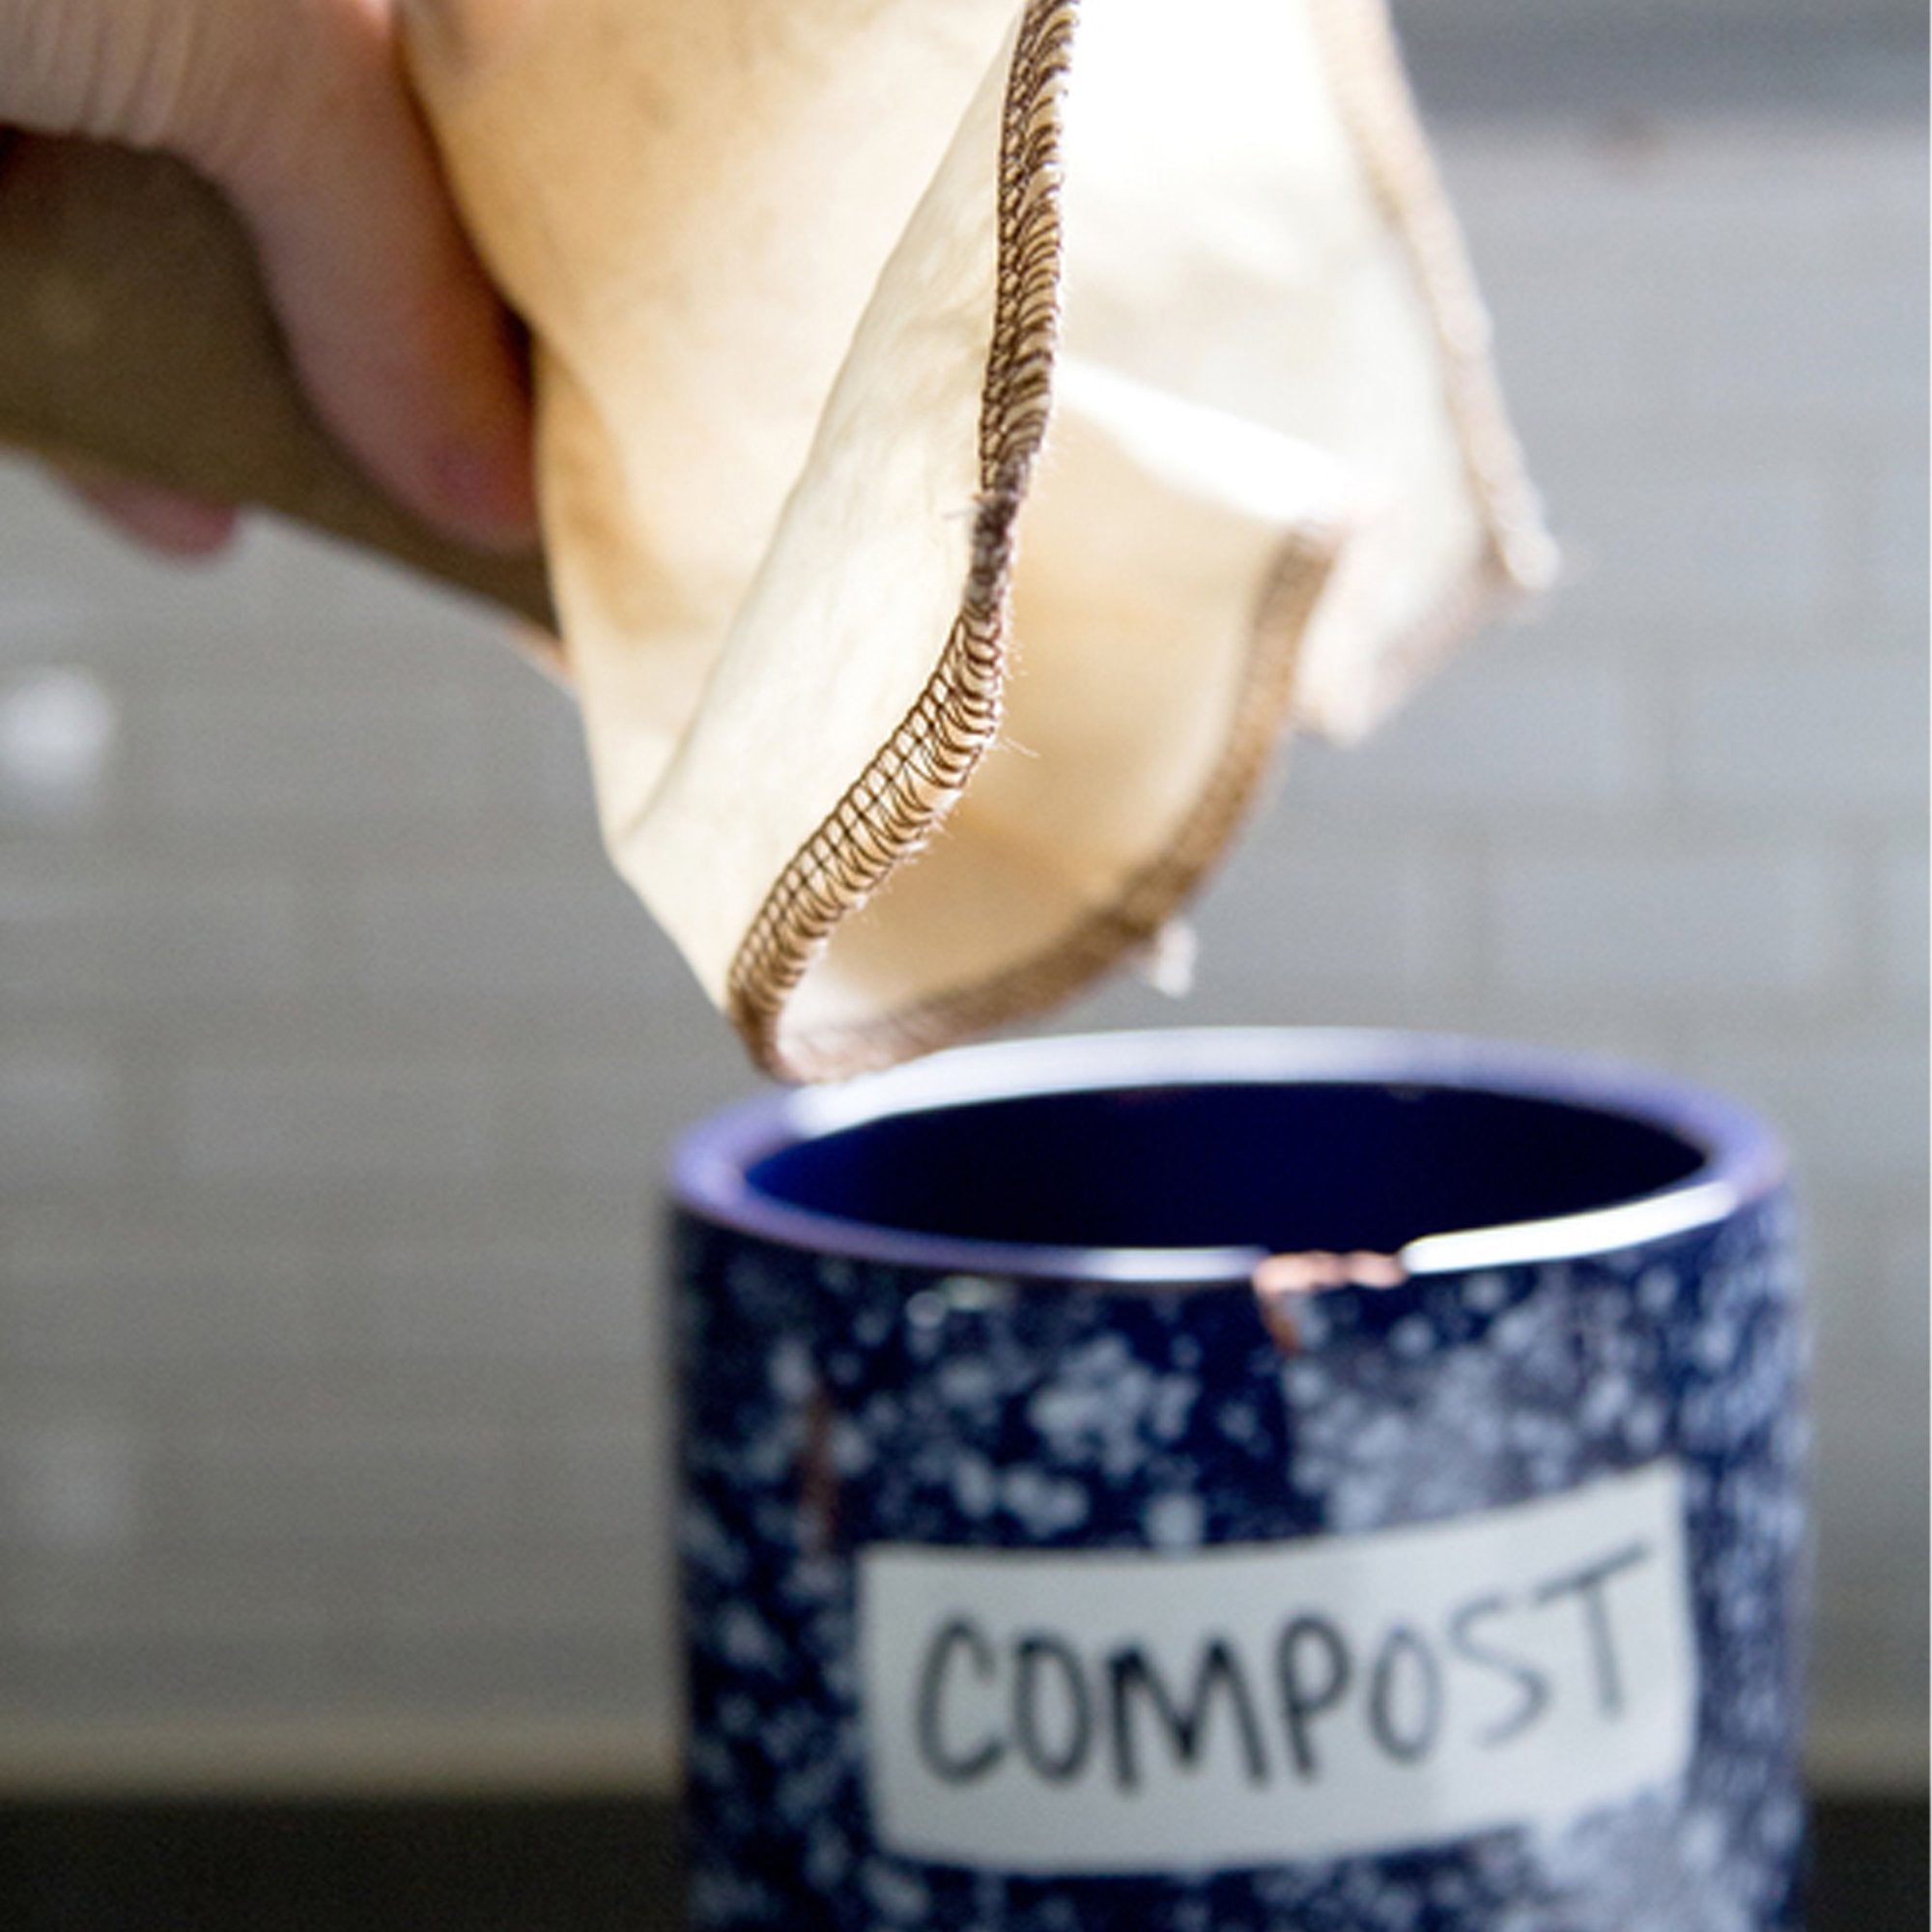 Reusable, organic cotton coffee filters made in the USA. #2 filter size pouring old coffee grounds into blue ceramic labeled compost